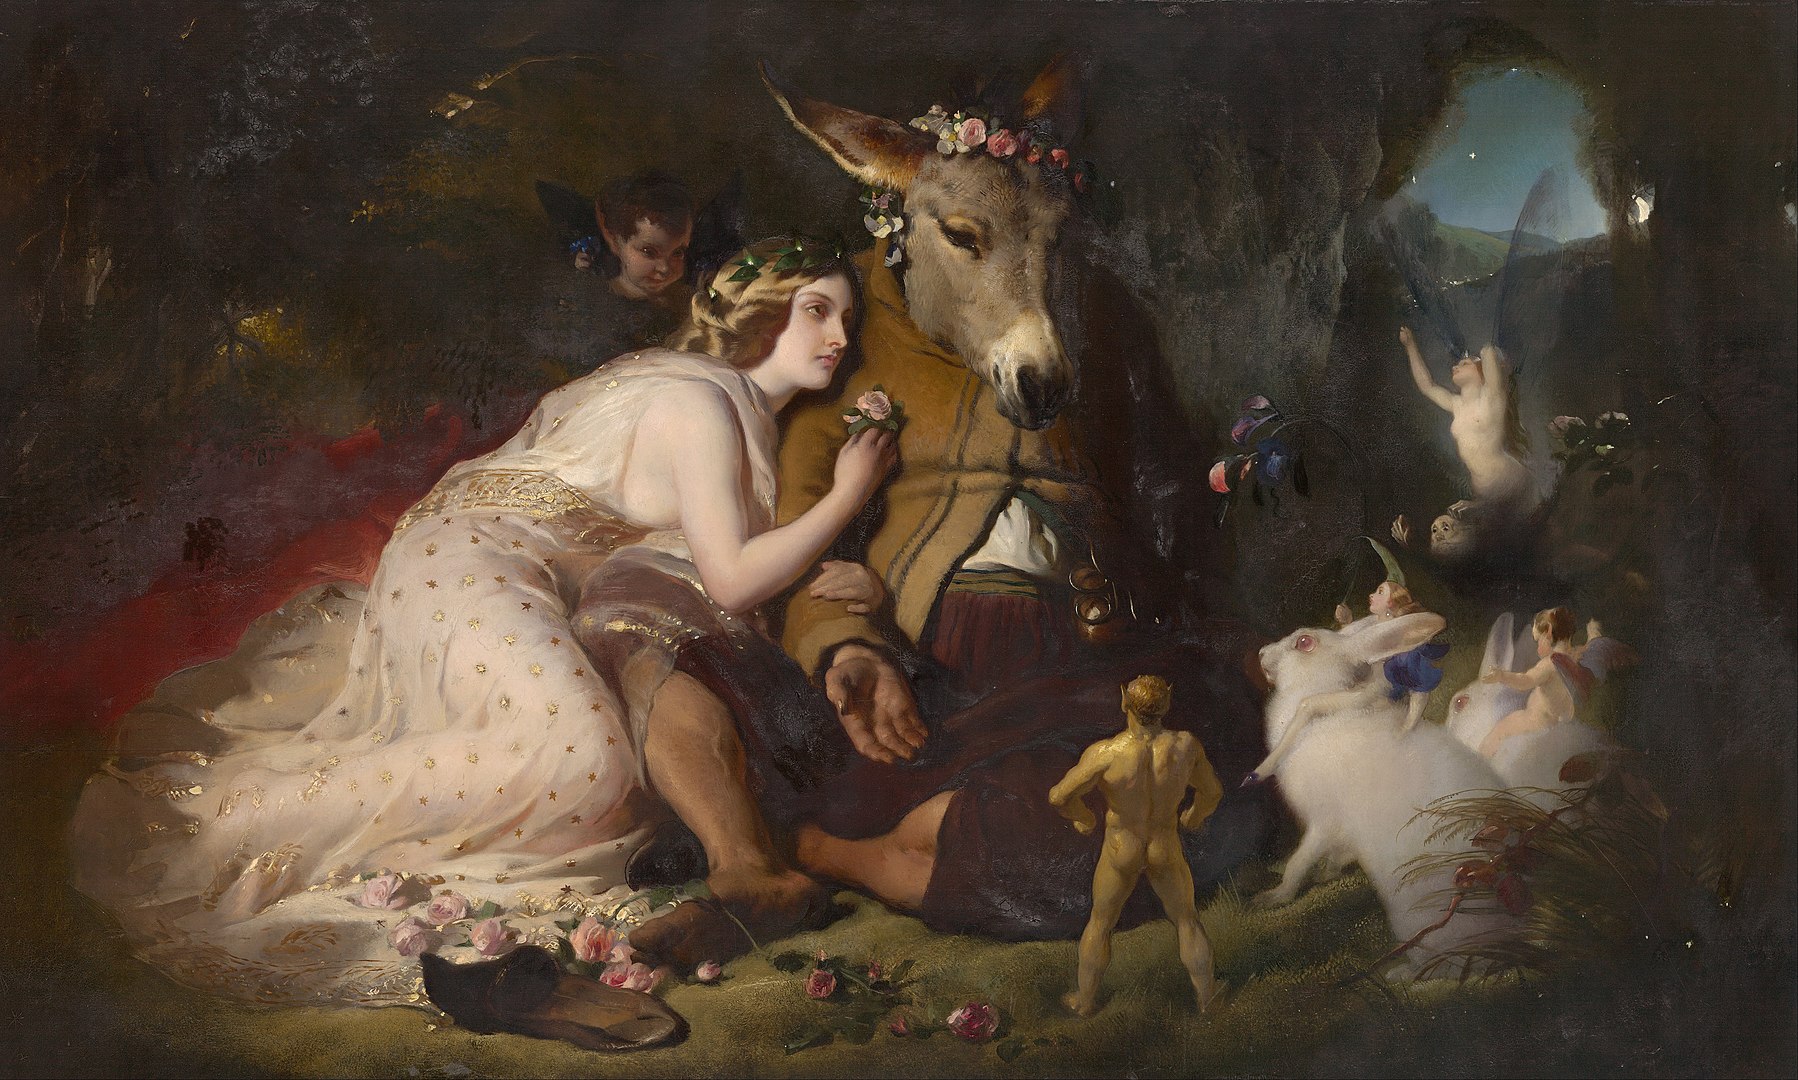 A young woman holds a flower as she sits and leans against an animal who is half man half donkey while surrounded by bunnies and whimsical creatures.